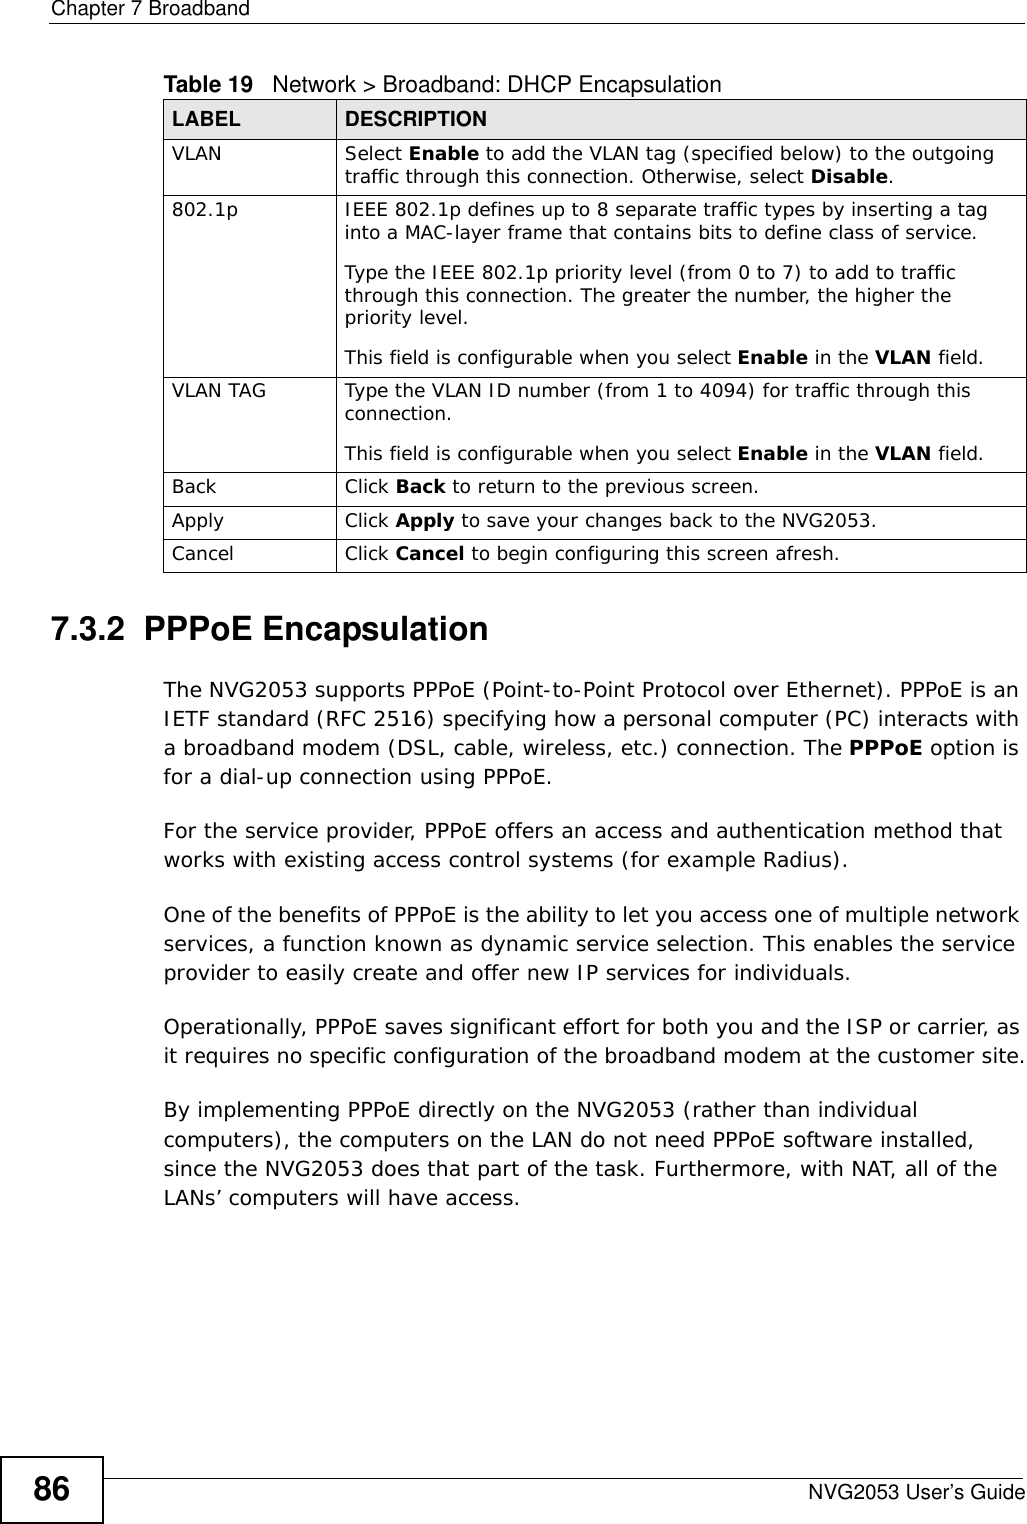 Chapter 7 BroadbandNVG2053 User’s Guide867.3.2  PPPoE EncapsulationThe NVG2053 supports PPPoE (Point-to-Point Protocol over Ethernet). PPPoE is an IETF standard (RFC 2516) specifying how a personal computer (PC) interacts with a broadband modem (DSL, cable, wireless, etc.) connection. The PPPoE option is for a dial-up connection using PPPoE.For the service provider, PPPoE offers an access and authentication method that works with existing access control systems (for example Radius).One of the benefits of PPPoE is the ability to let you access one of multiple network services, a function known as dynamic service selection. This enables the service provider to easily create and offer new IP services for individuals.Operationally, PPPoE saves significant effort for both you and the ISP or carrier, as it requires no specific configuration of the broadband modem at the customer site.By implementing PPPoE directly on the NVG2053 (rather than individual computers), the computers on the LAN do not need PPPoE software installed, since the NVG2053 does that part of the task. Furthermore, with NAT, all of the LANs’ computers will have access.VLAN Select Enable to add the VLAN tag (specified below) to the outgoing traffic through this connection. Otherwise, select Disable.802.1p IEEE 802.1p defines up to 8 separate traffic types by inserting a tag into a MAC-layer frame that contains bits to define class of service. Type the IEEE 802.1p priority level (from 0 to 7) to add to traffic through this connection. The greater the number, the higher the priority level.This field is configurable when you select Enable in the VLAN field.VLAN TAG Type the VLAN ID number (from 1 to 4094) for traffic through this connection.This field is configurable when you select Enable in the VLAN field.Back Click Back to return to the previous screen.Apply Click Apply to save your changes back to the NVG2053.Cancel Click Cancel to begin configuring this screen afresh.Table 19   Network &gt; Broadband: DHCP EncapsulationLABEL DESCRIPTION